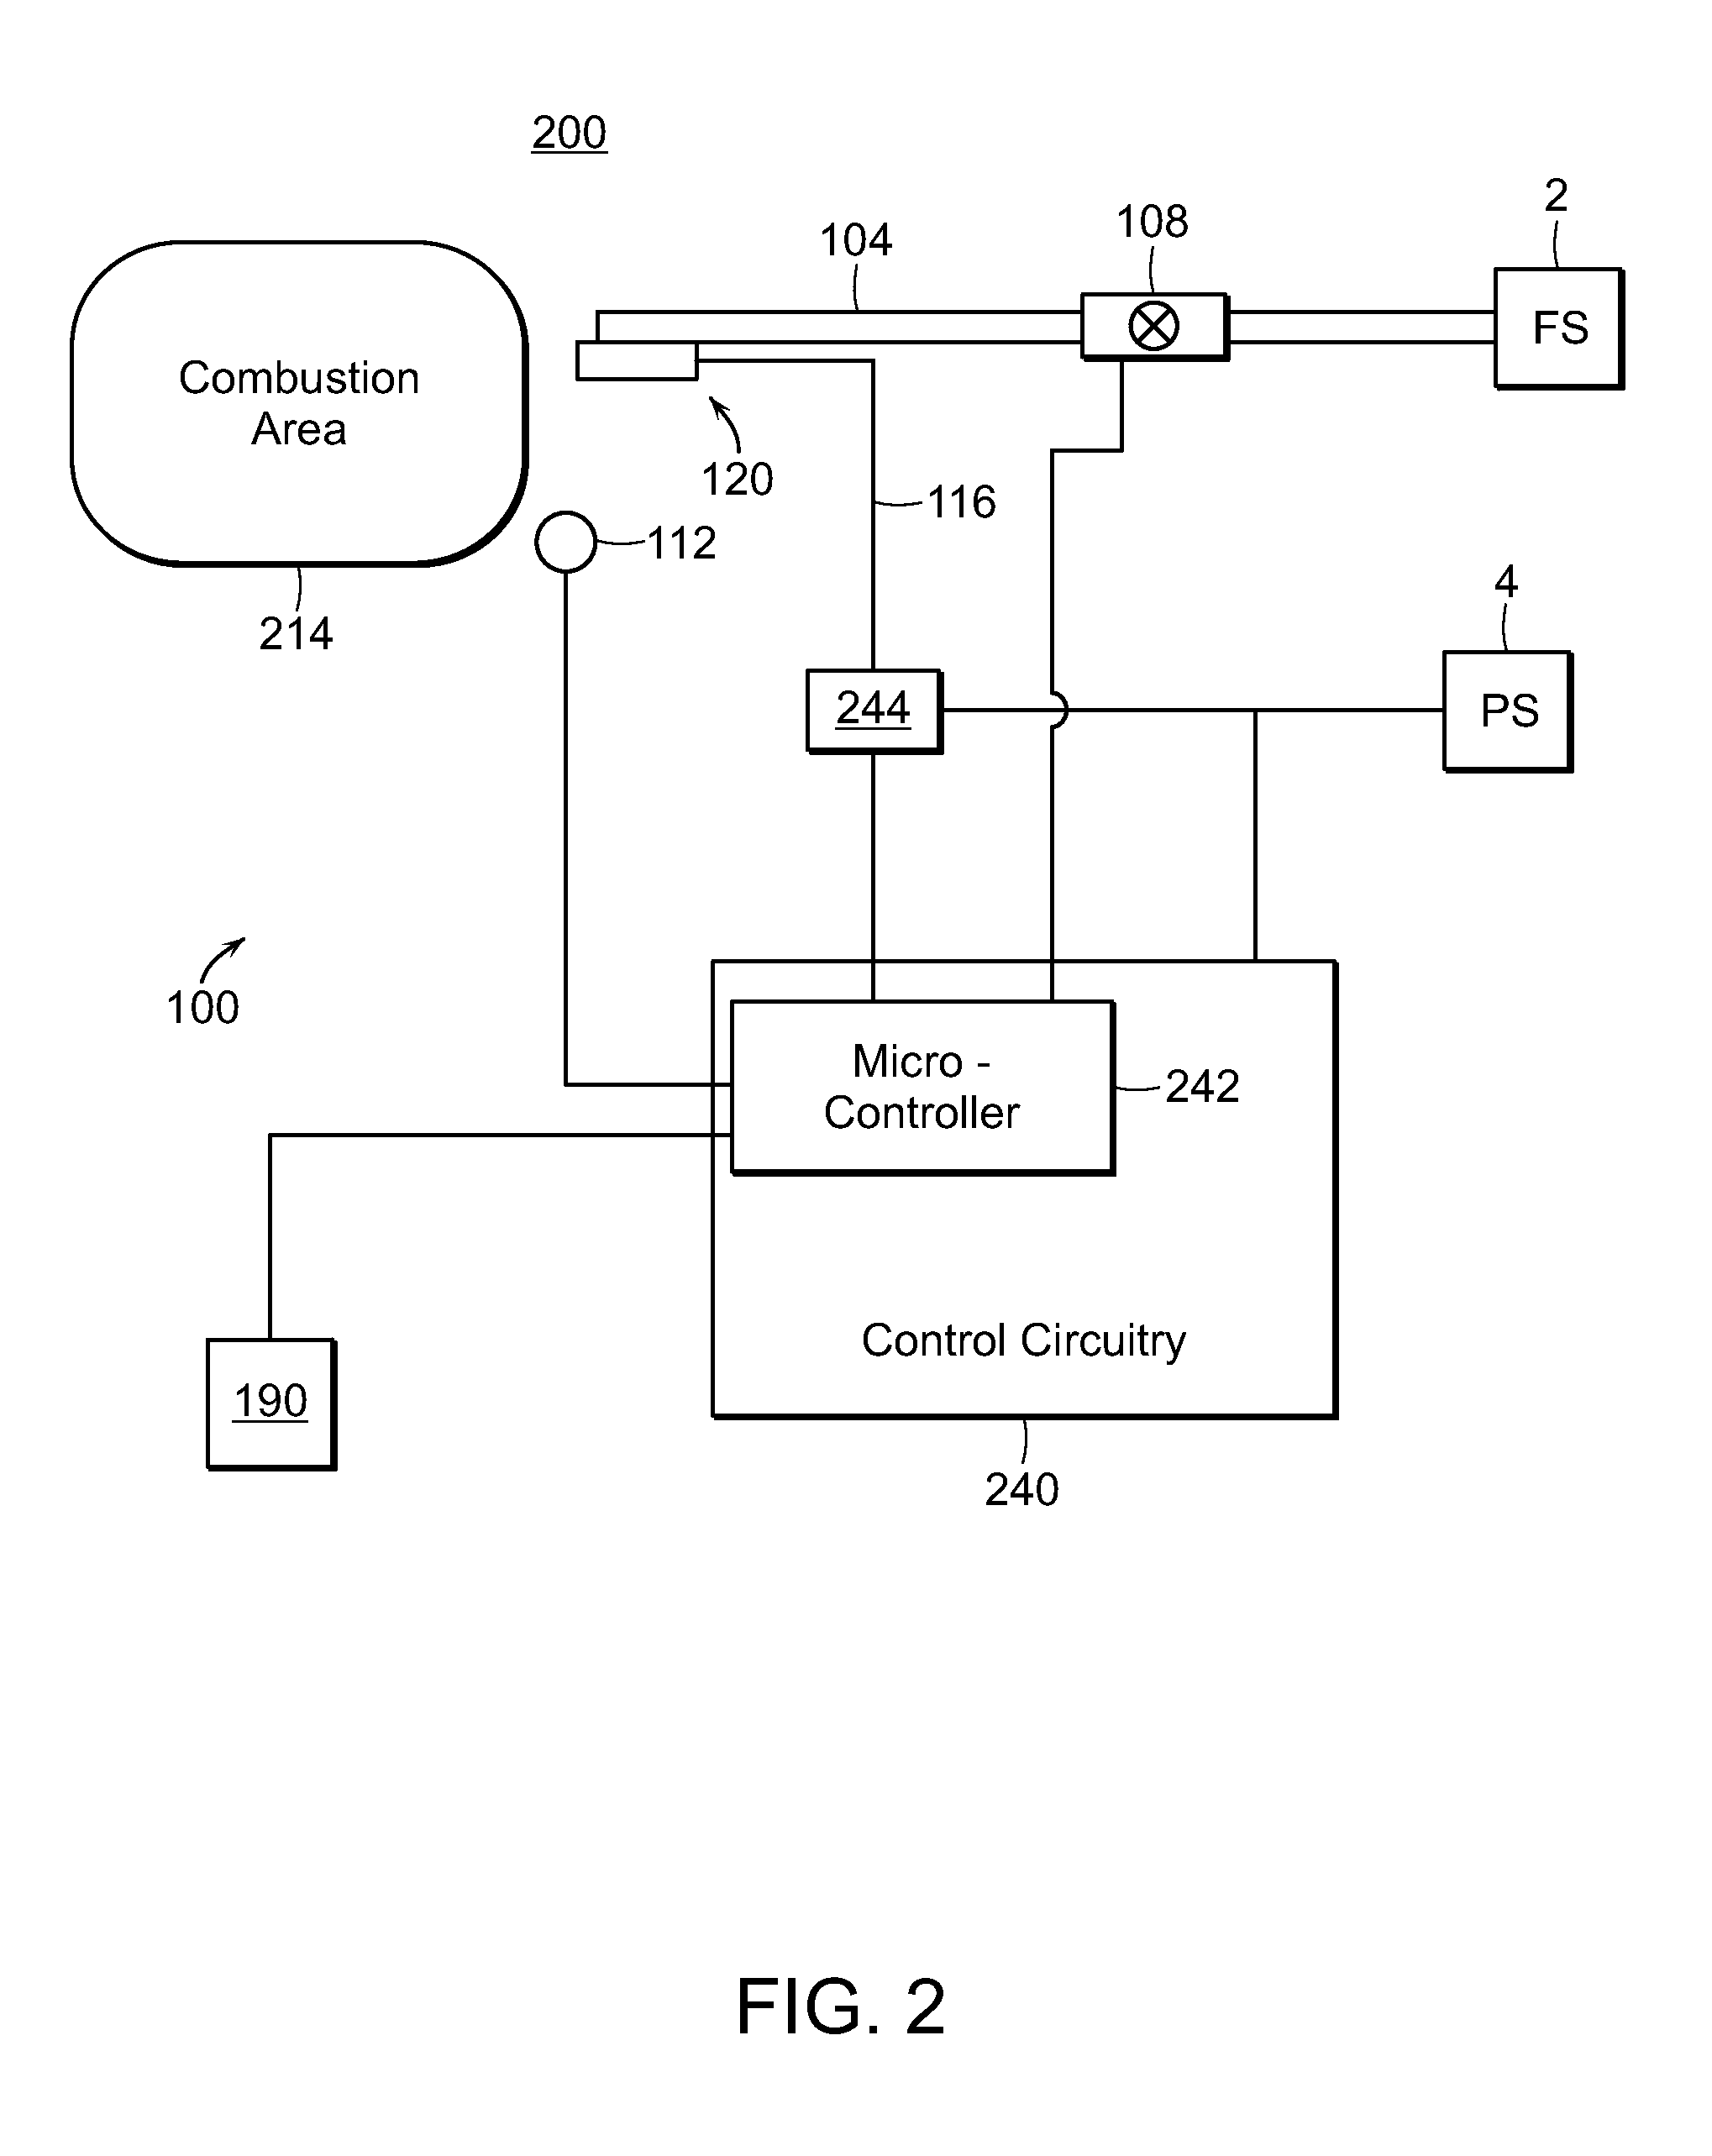 Ignition system having control circuit with learning capabilities and devices and methods related thereto